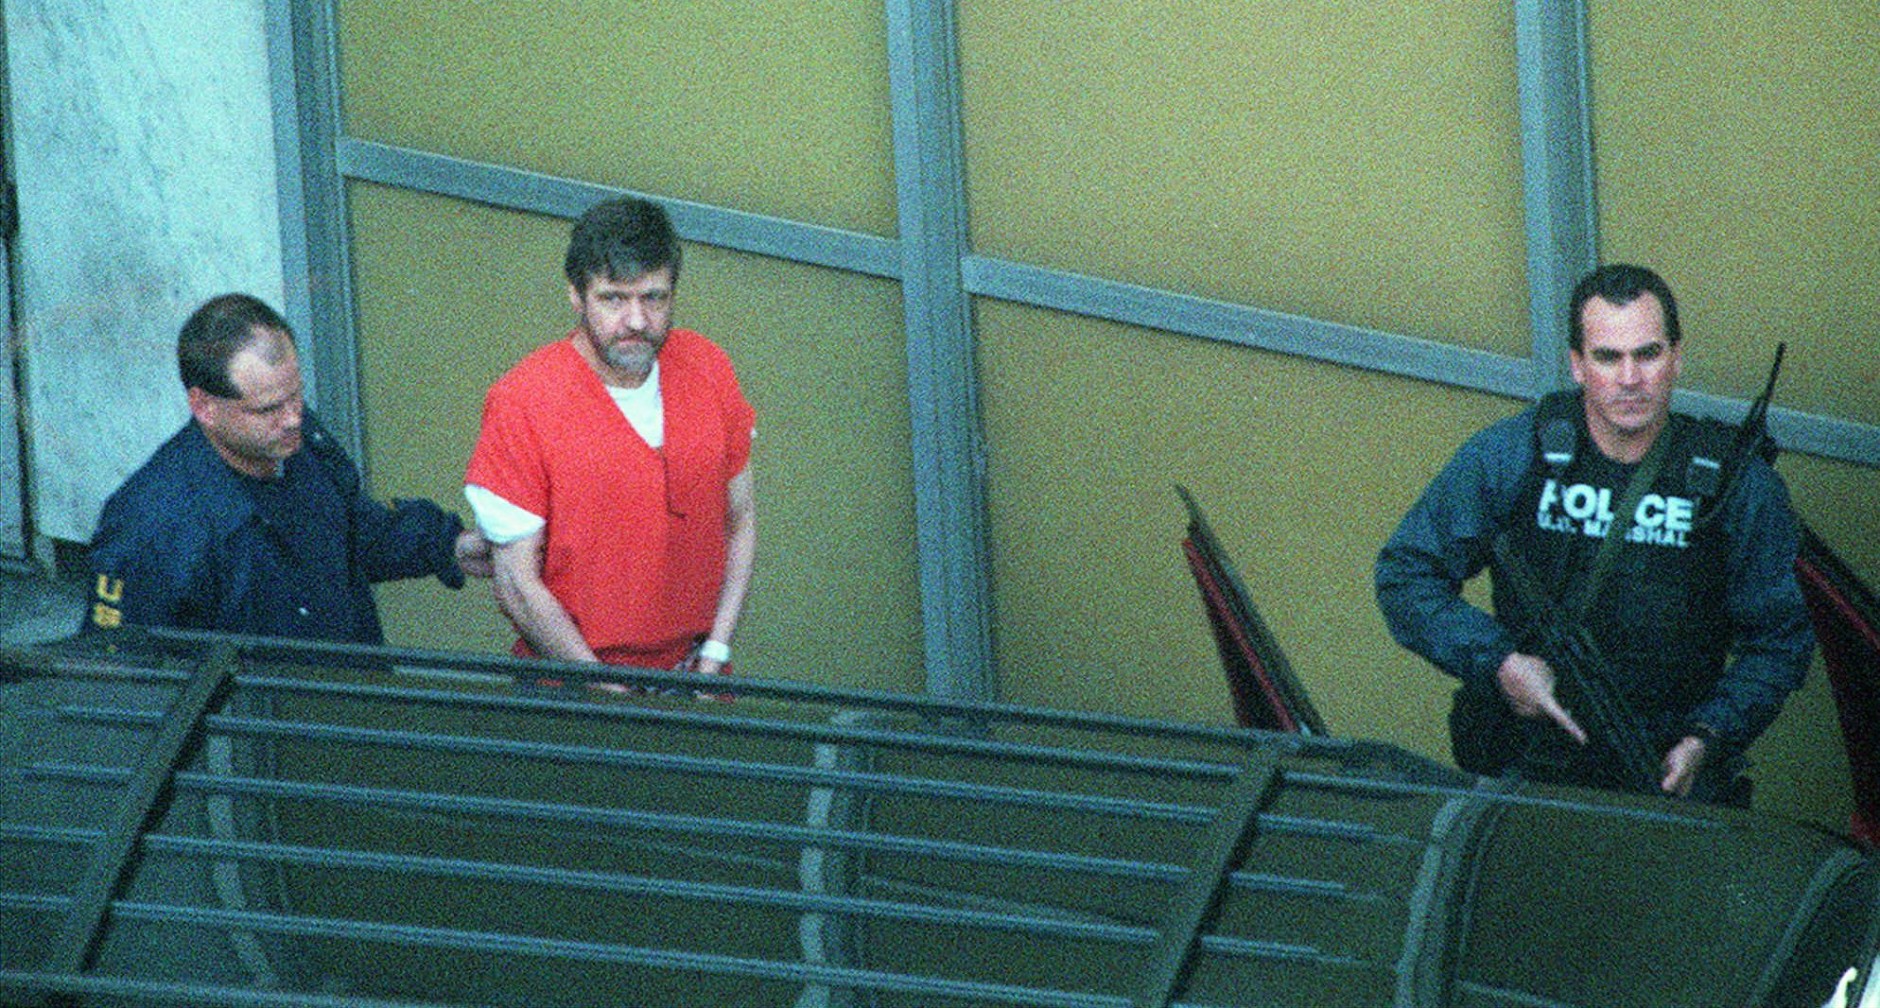 Convicted Unabomber Theodore Kaczynski, center, is led from the Federal Courthouse in Sacramento, Calif., Thursday Jan. 22, 1998 following his guilty plea to all charges in the case. In return, Kaczynski will spend the rest of his life in prison without parole. (AP Photo/Bob Galbraith)